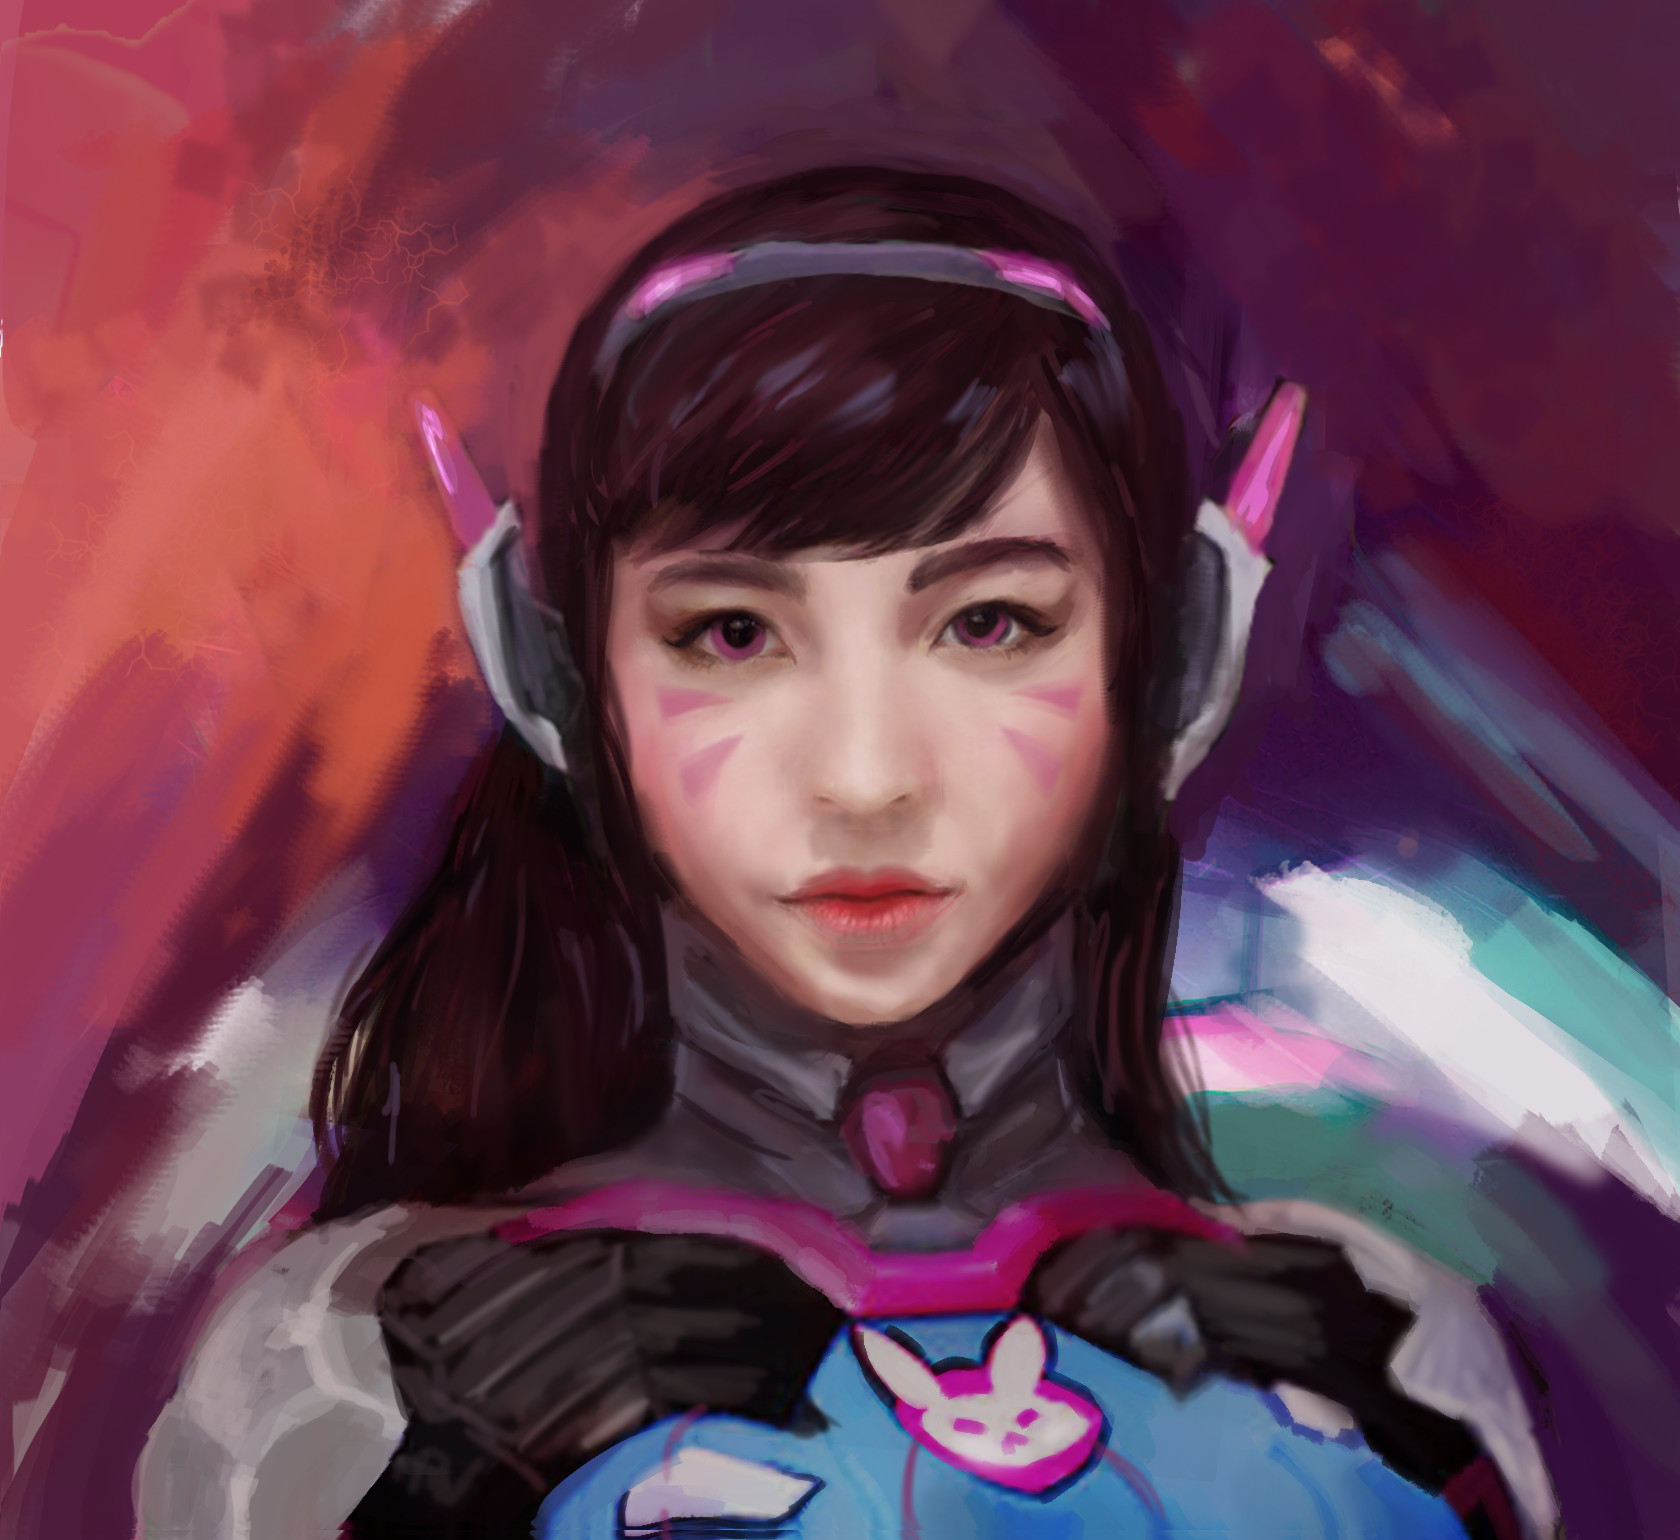 D.va's ready to get her game on in this professional thick glossy prin...